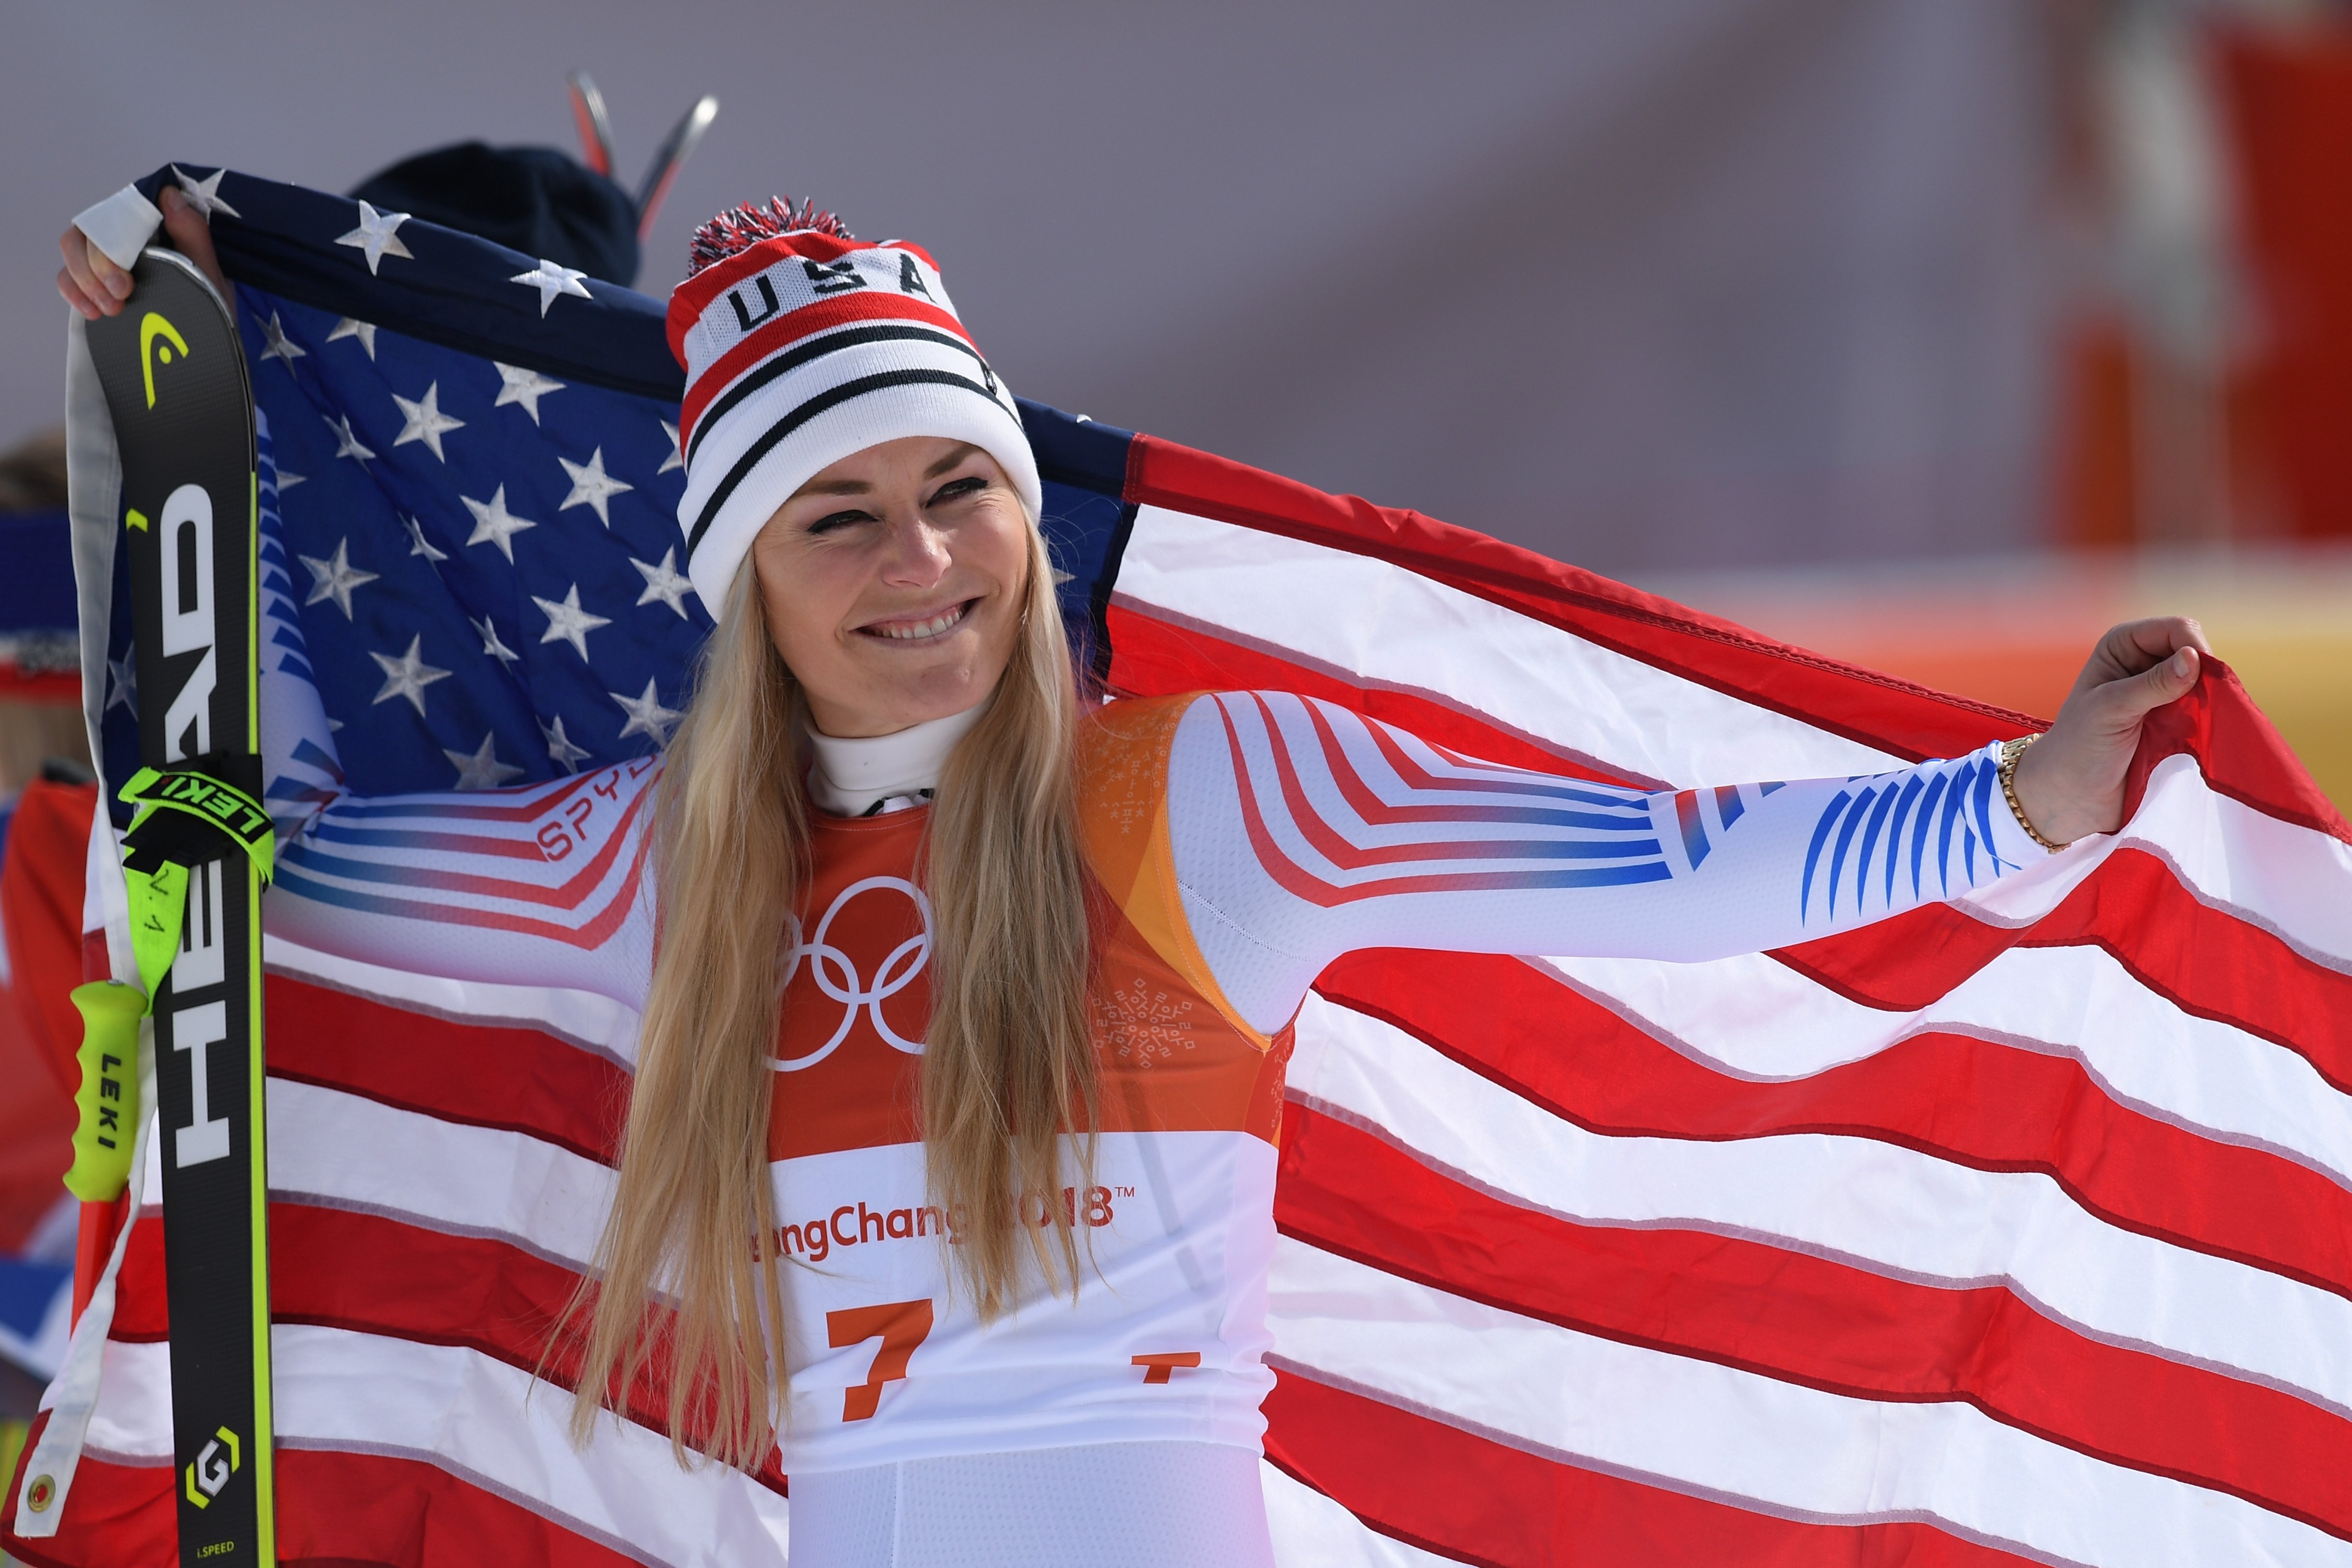 Bronze medallist Lindsey Vonn of the United States celebrates during the victory ceremony for the Ladies' Downhill on day 12 of the PyeongChang 2018 Winter Olympic Games at Jeongseon Alpine Centre on Feb. 21, 2018 in Pyeongchang-gun, South Korea. (Matthias Hangst—Getty Images)